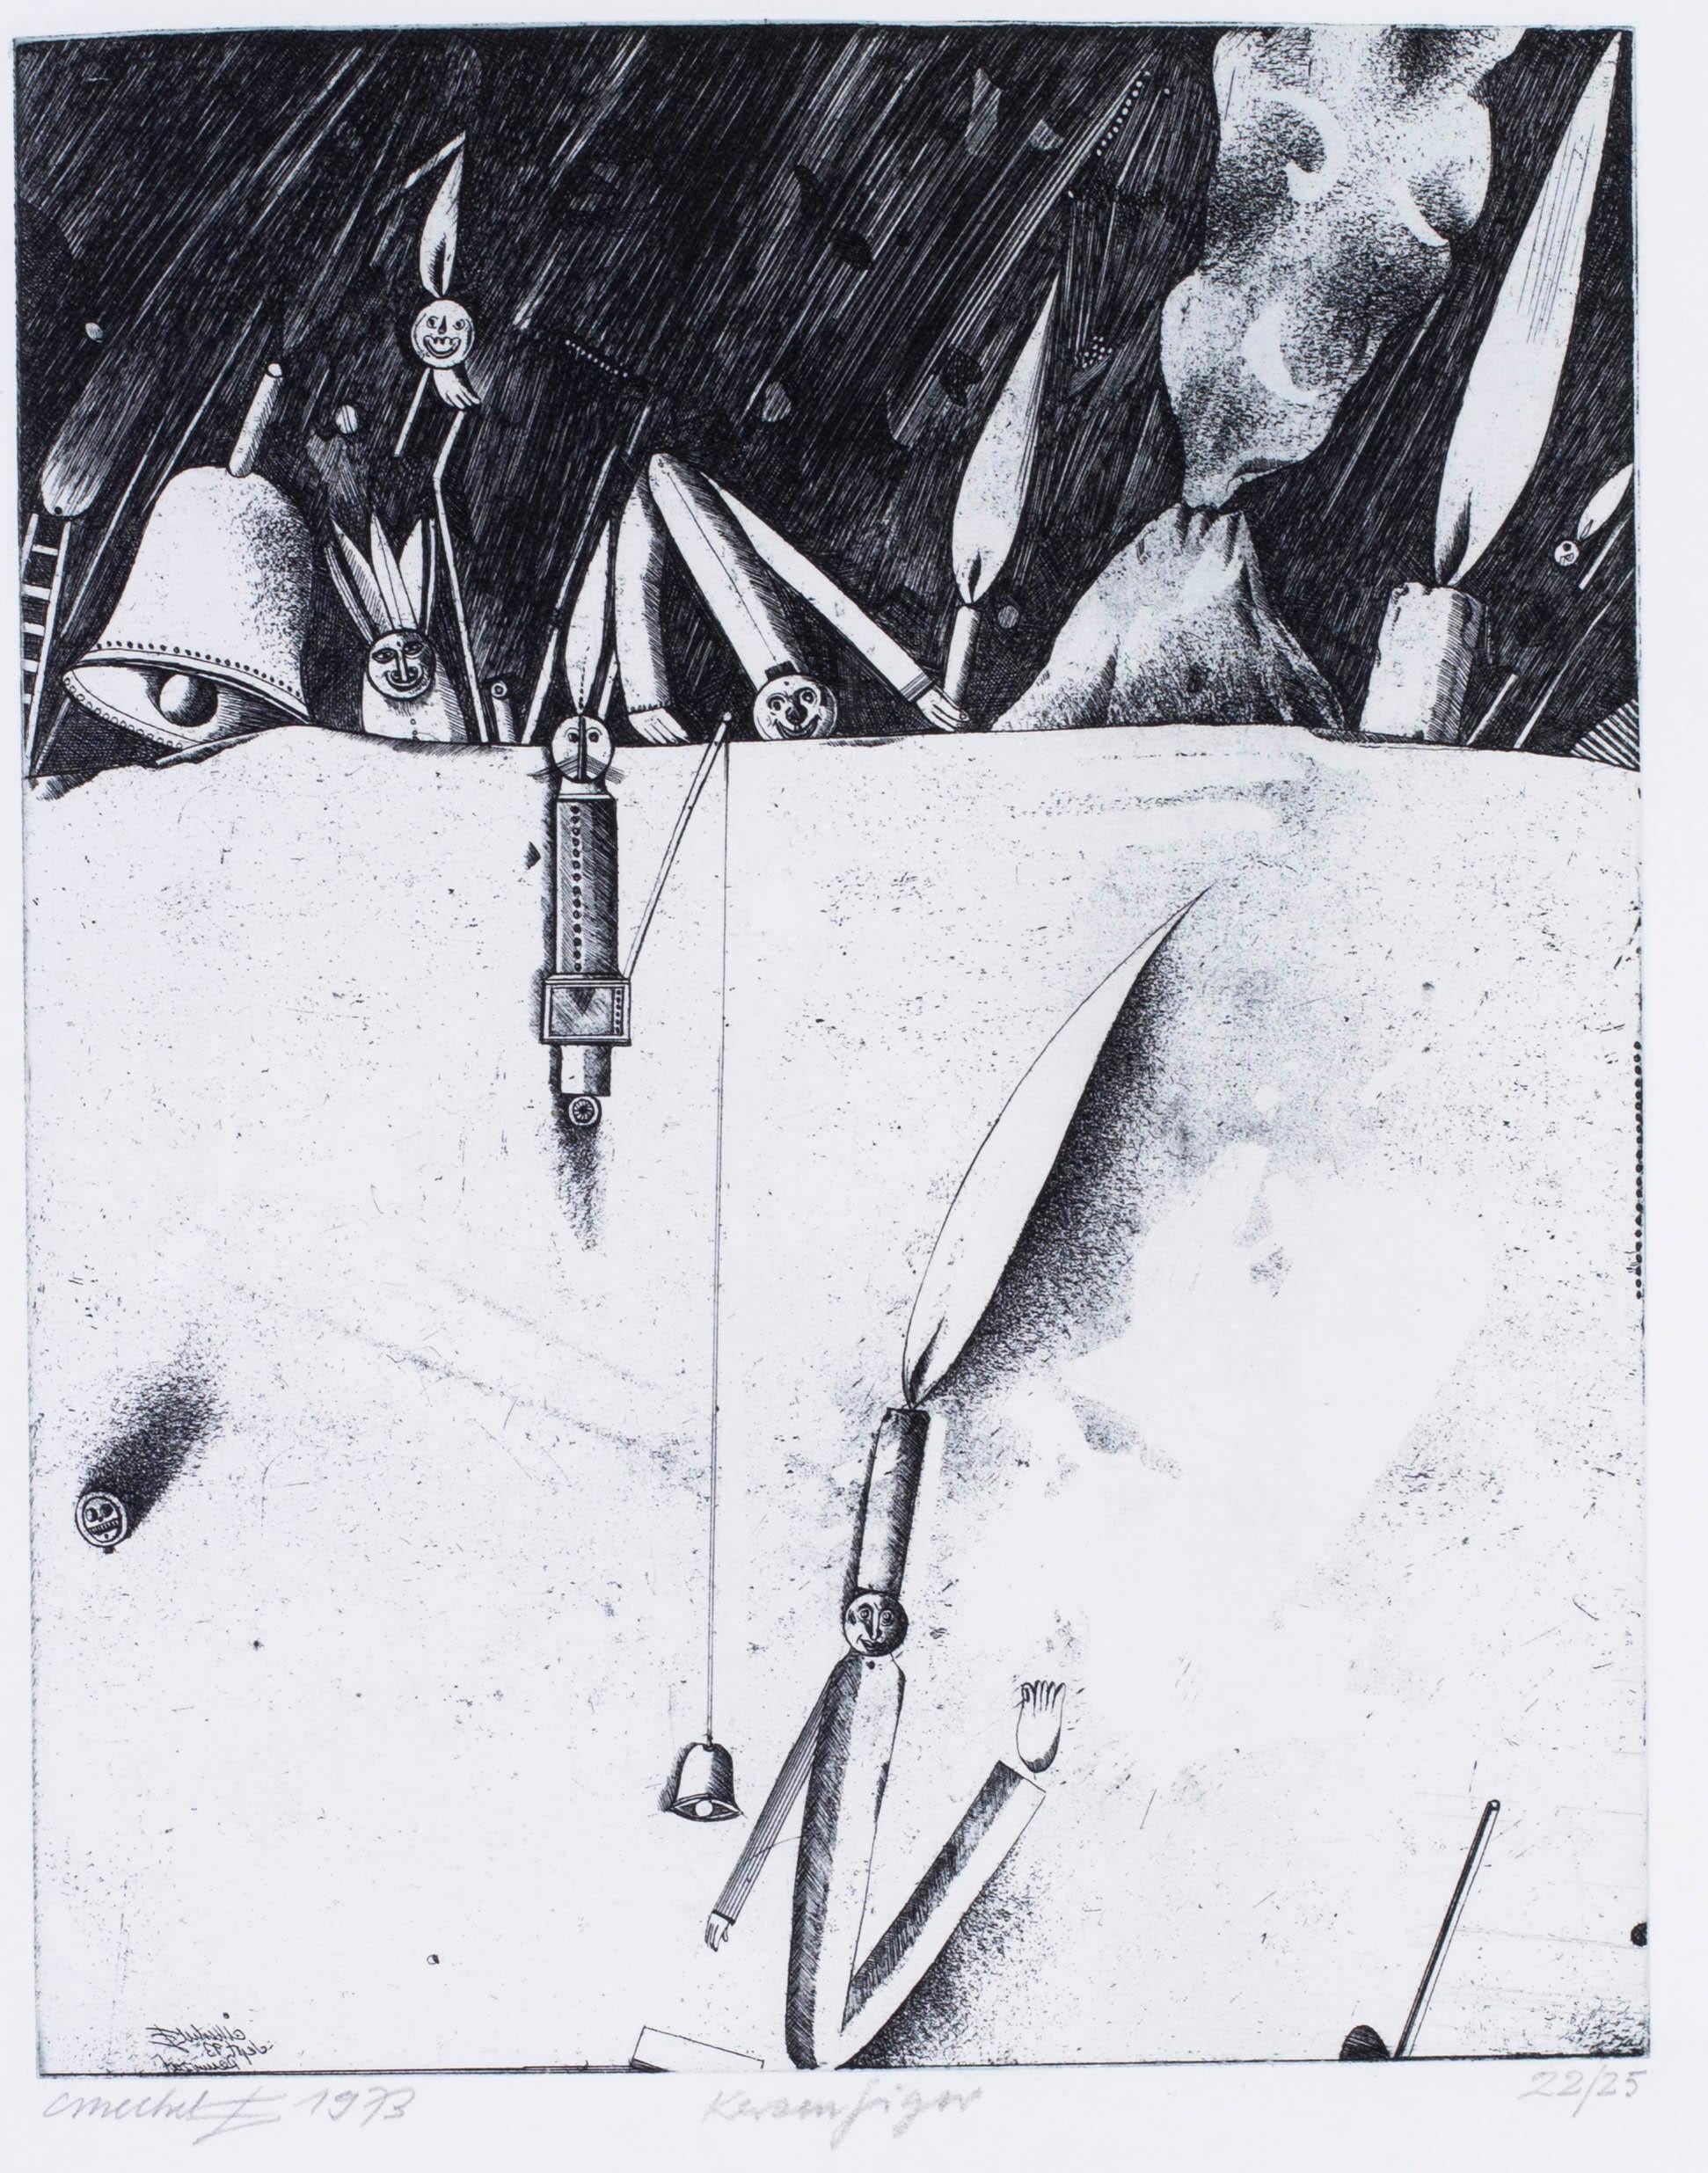 1970s Surrealist black and white etchings by German artist Christoph Muhil - Print by Unknown